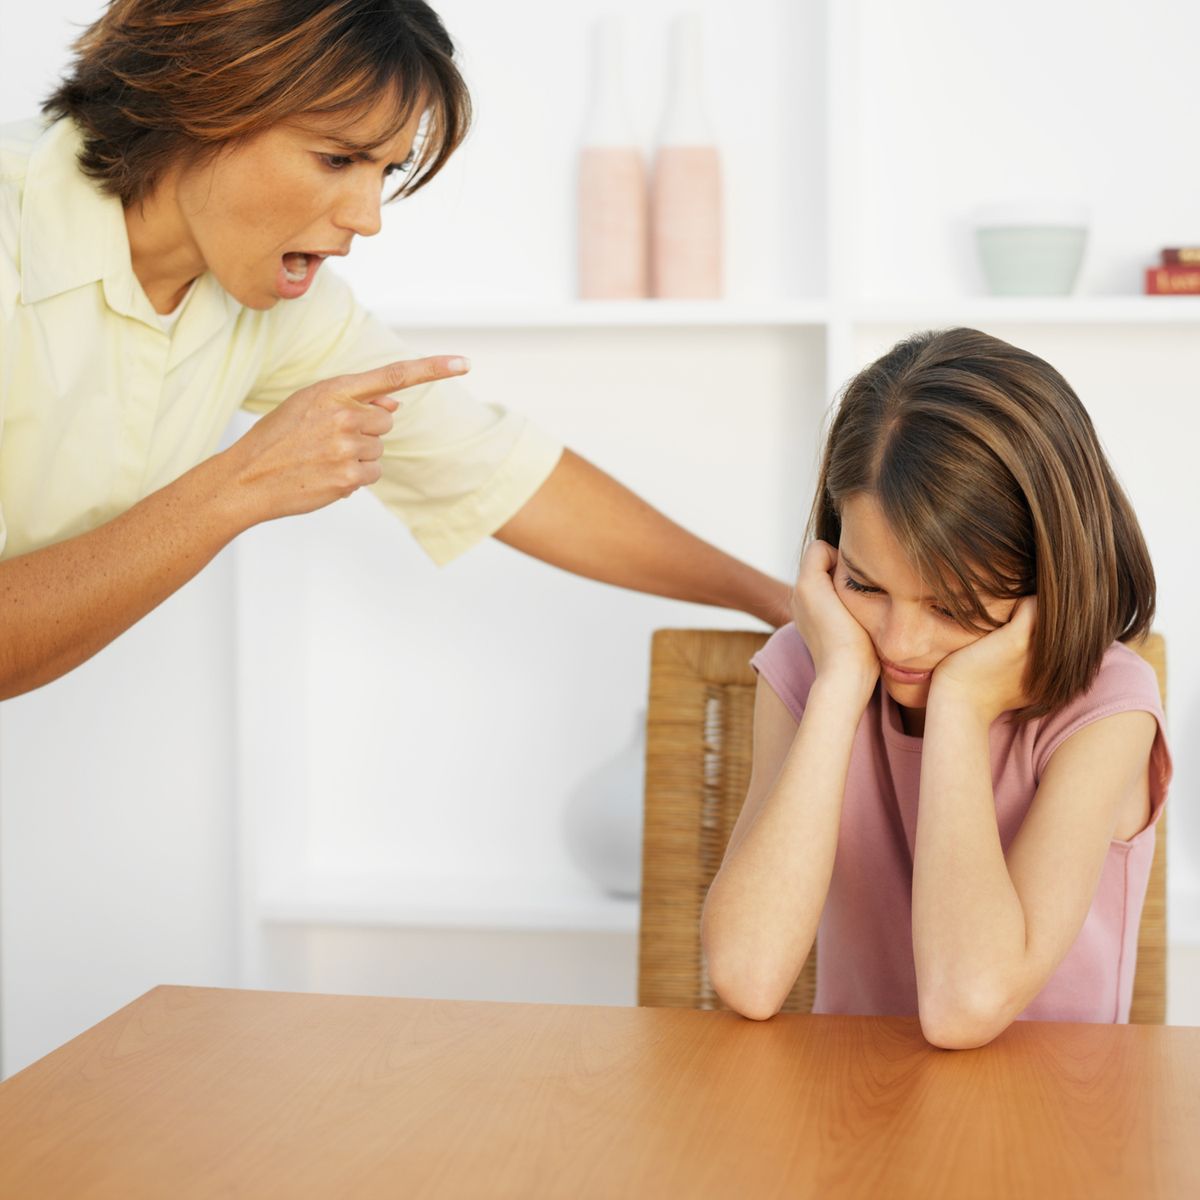 Prevention Is Key To Avoiding This Common Parenting Mistake